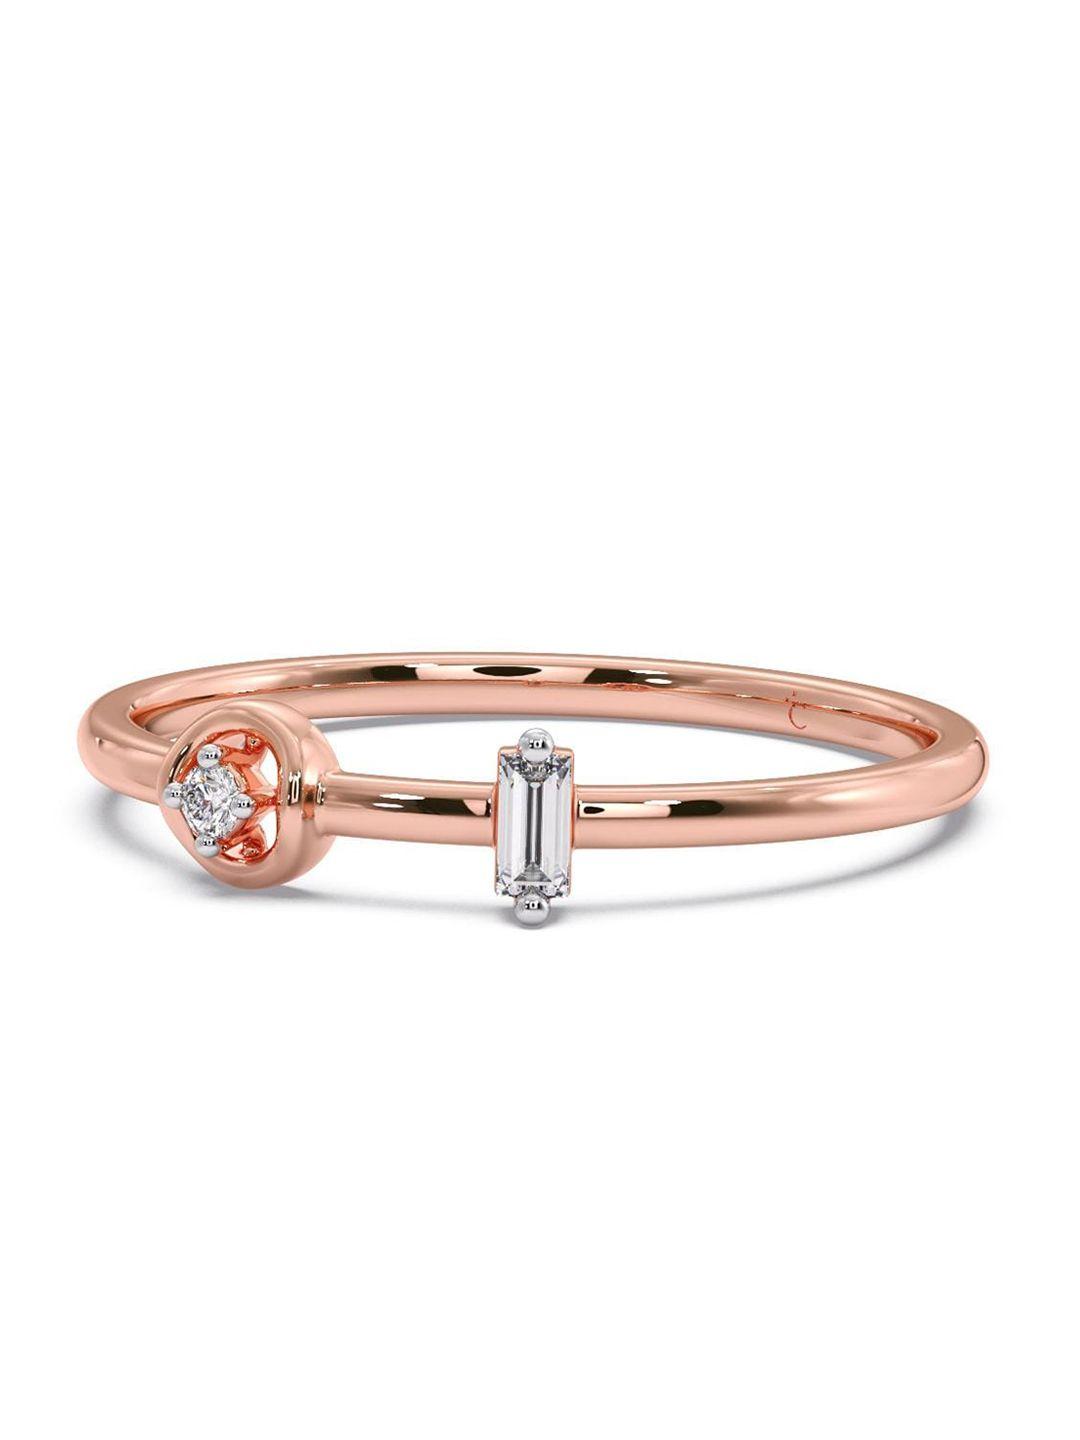 candere a kalyan jewellers company 18kt rose gold diamond finger ring-1.23gm